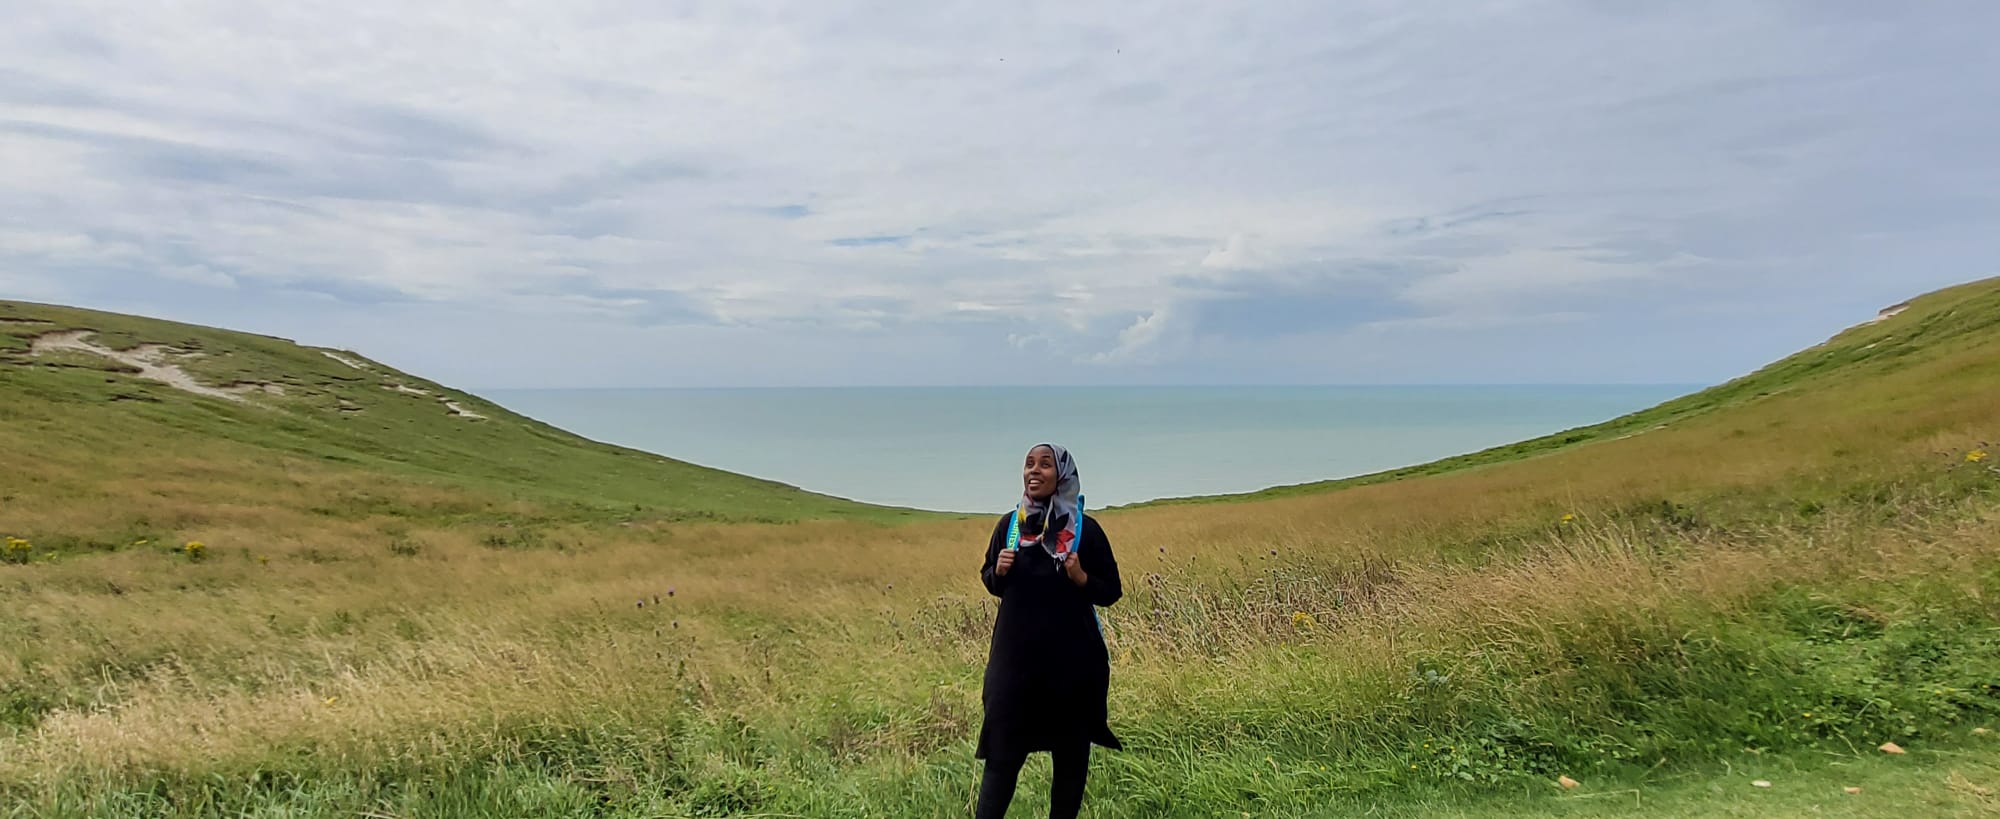 Halima pictured in the centre of the image on a hike of The Seven Sisters, a series of chalk sea cliffs on the English Channel coast.